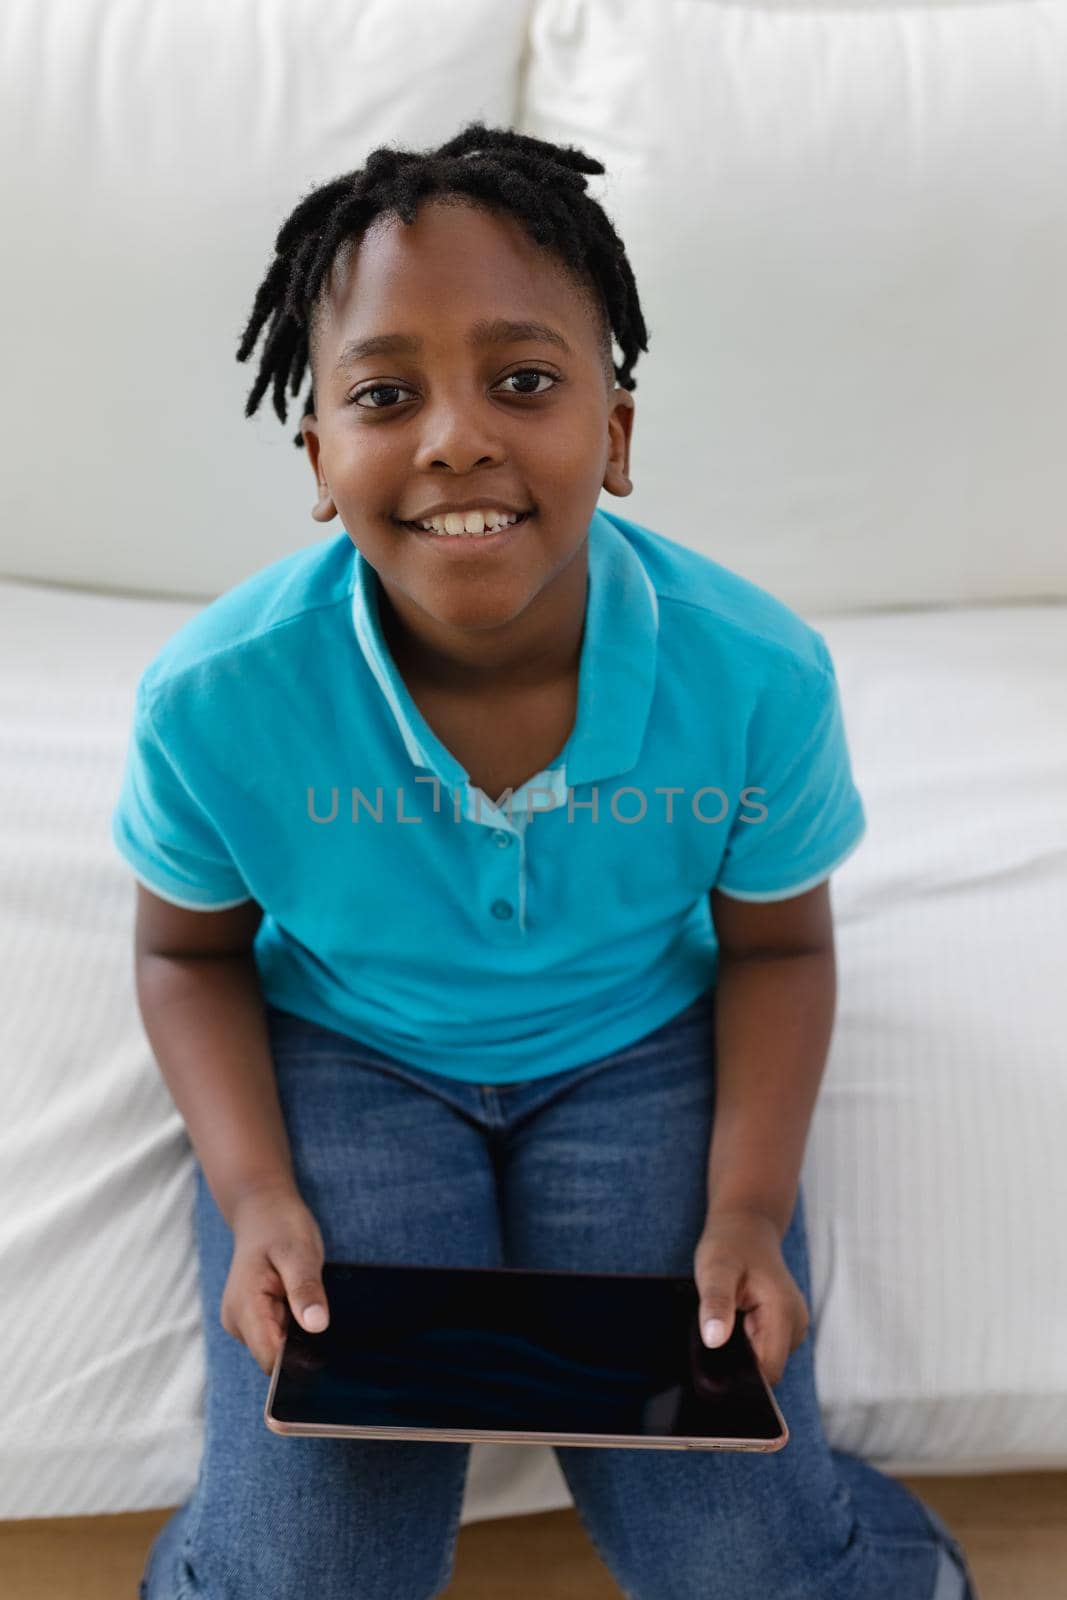 Portrait of smiling african american boy with short dreadlocks sitting on couch using digital tablet. staying at home in isolation during quarantine lockdown.